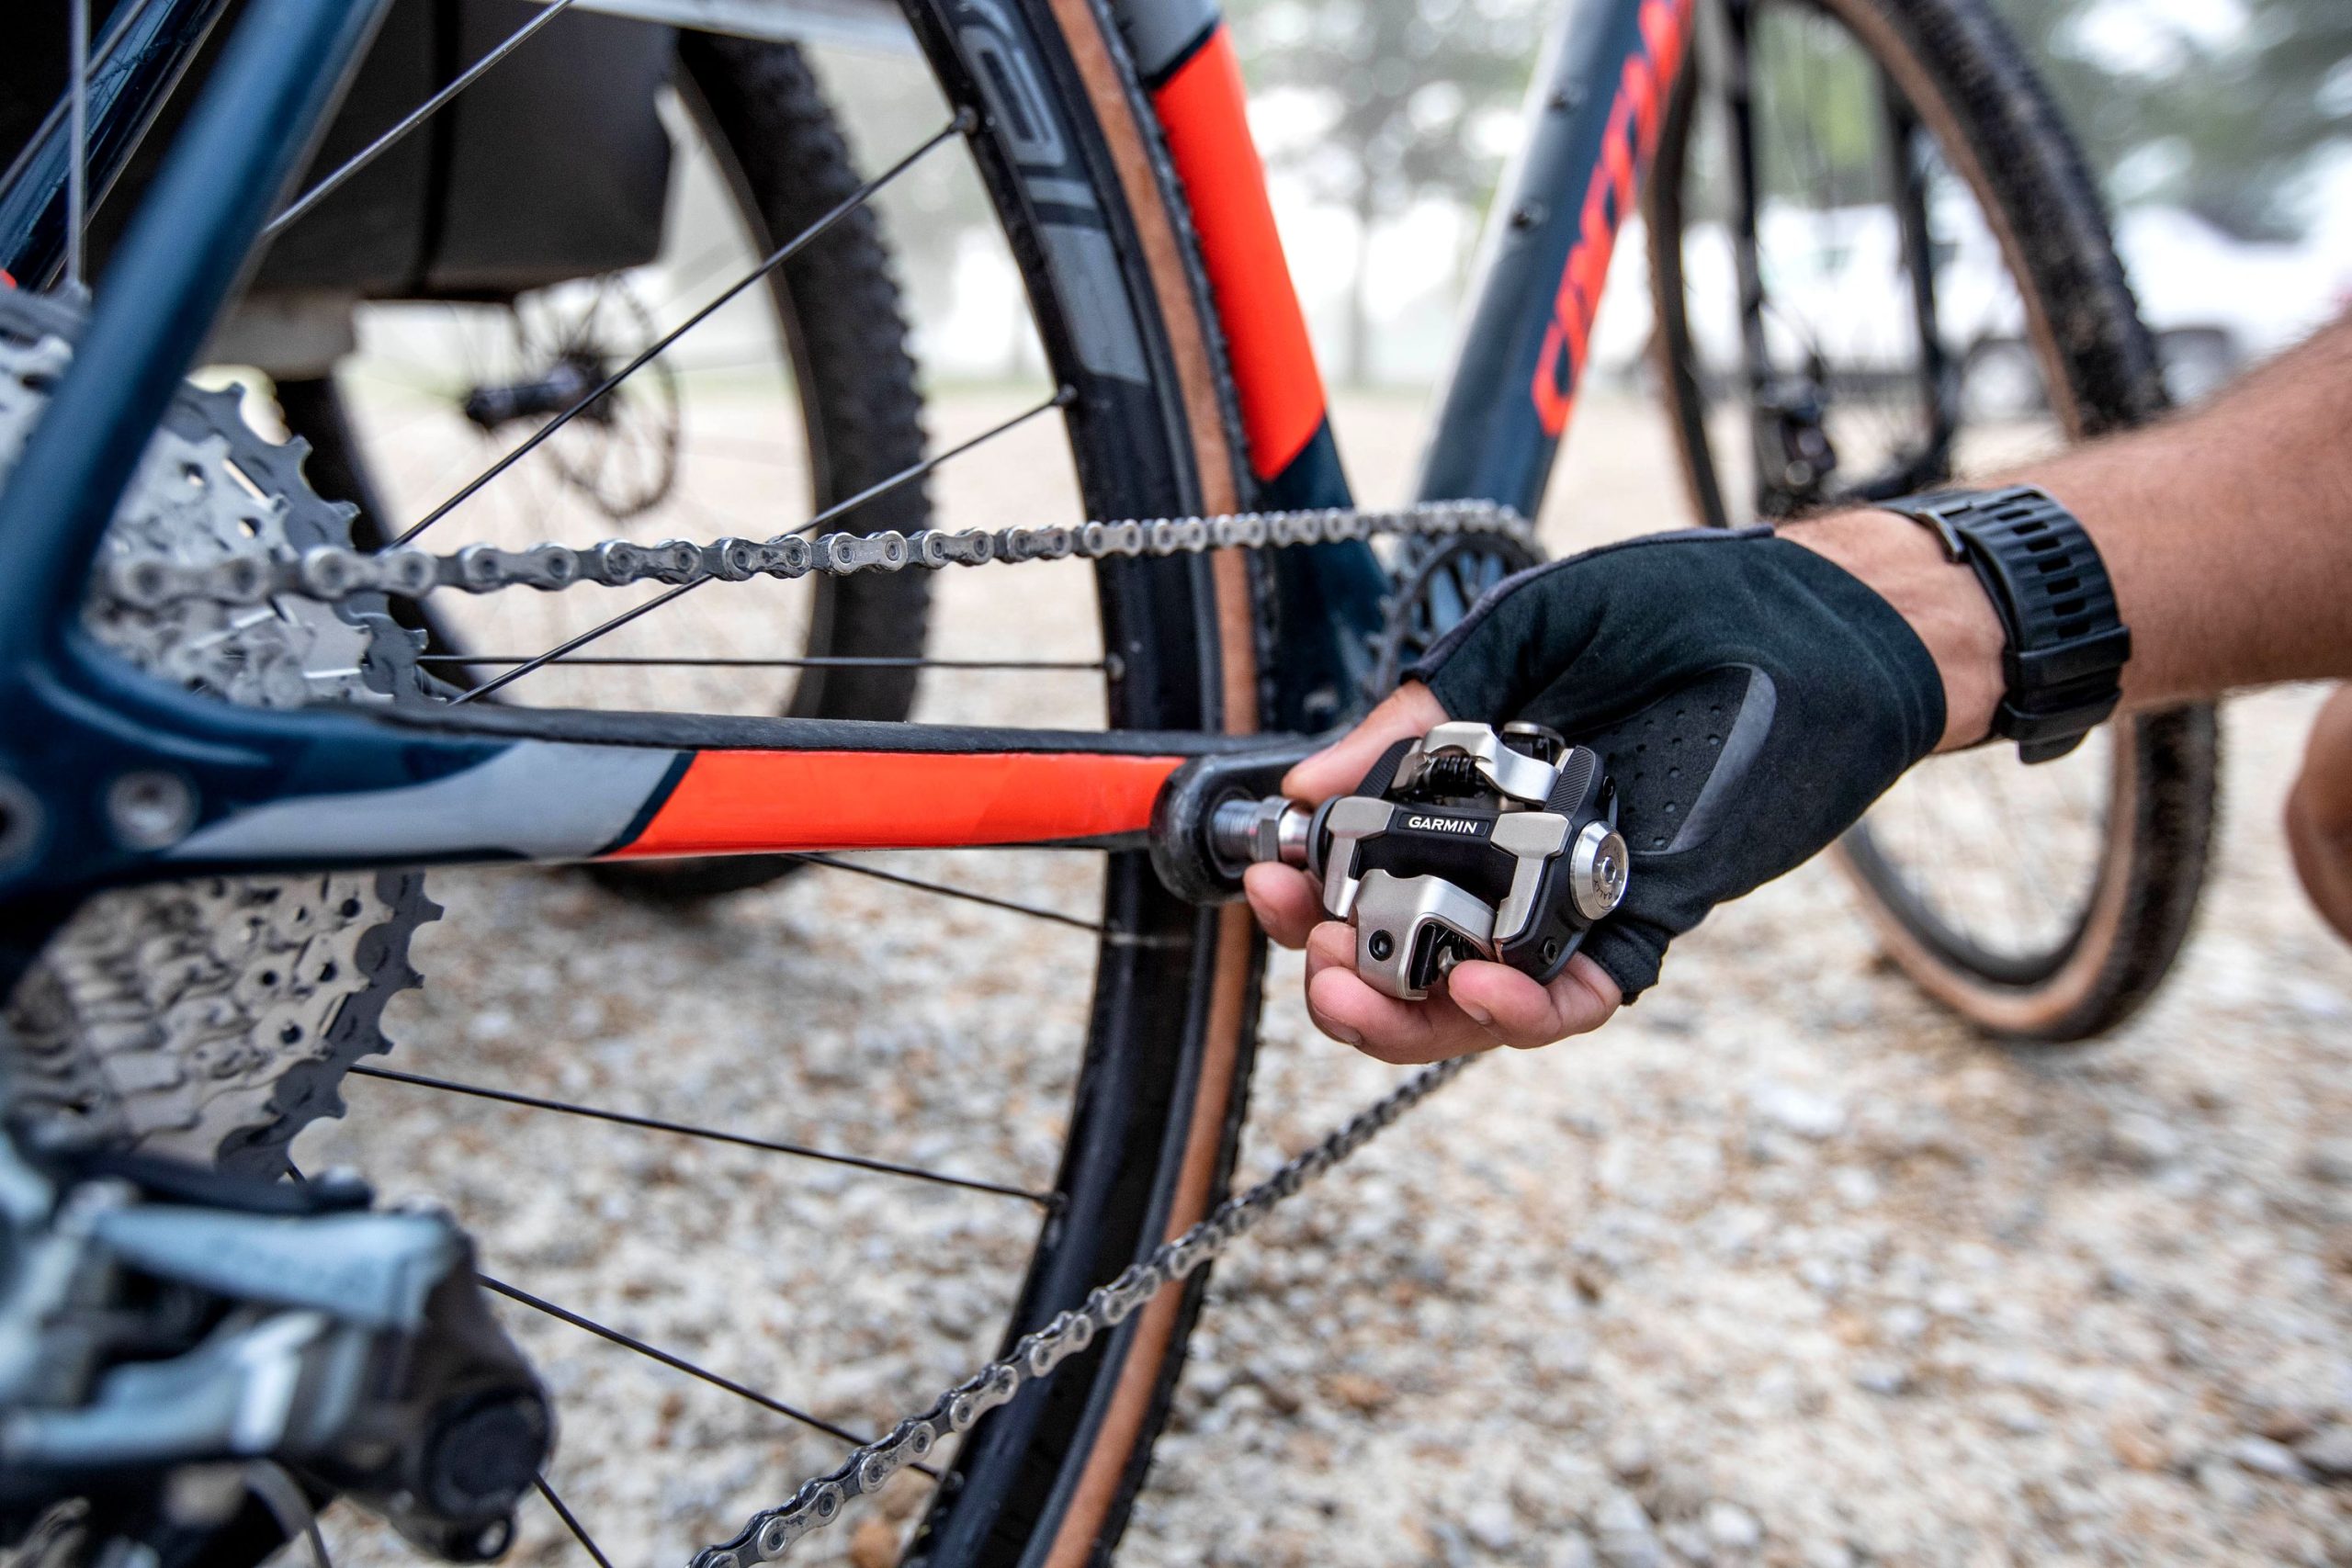 Garmin empowers cyclists with new Edge 1040 Solar Cycling Computer and Rally XC200 Power Meter